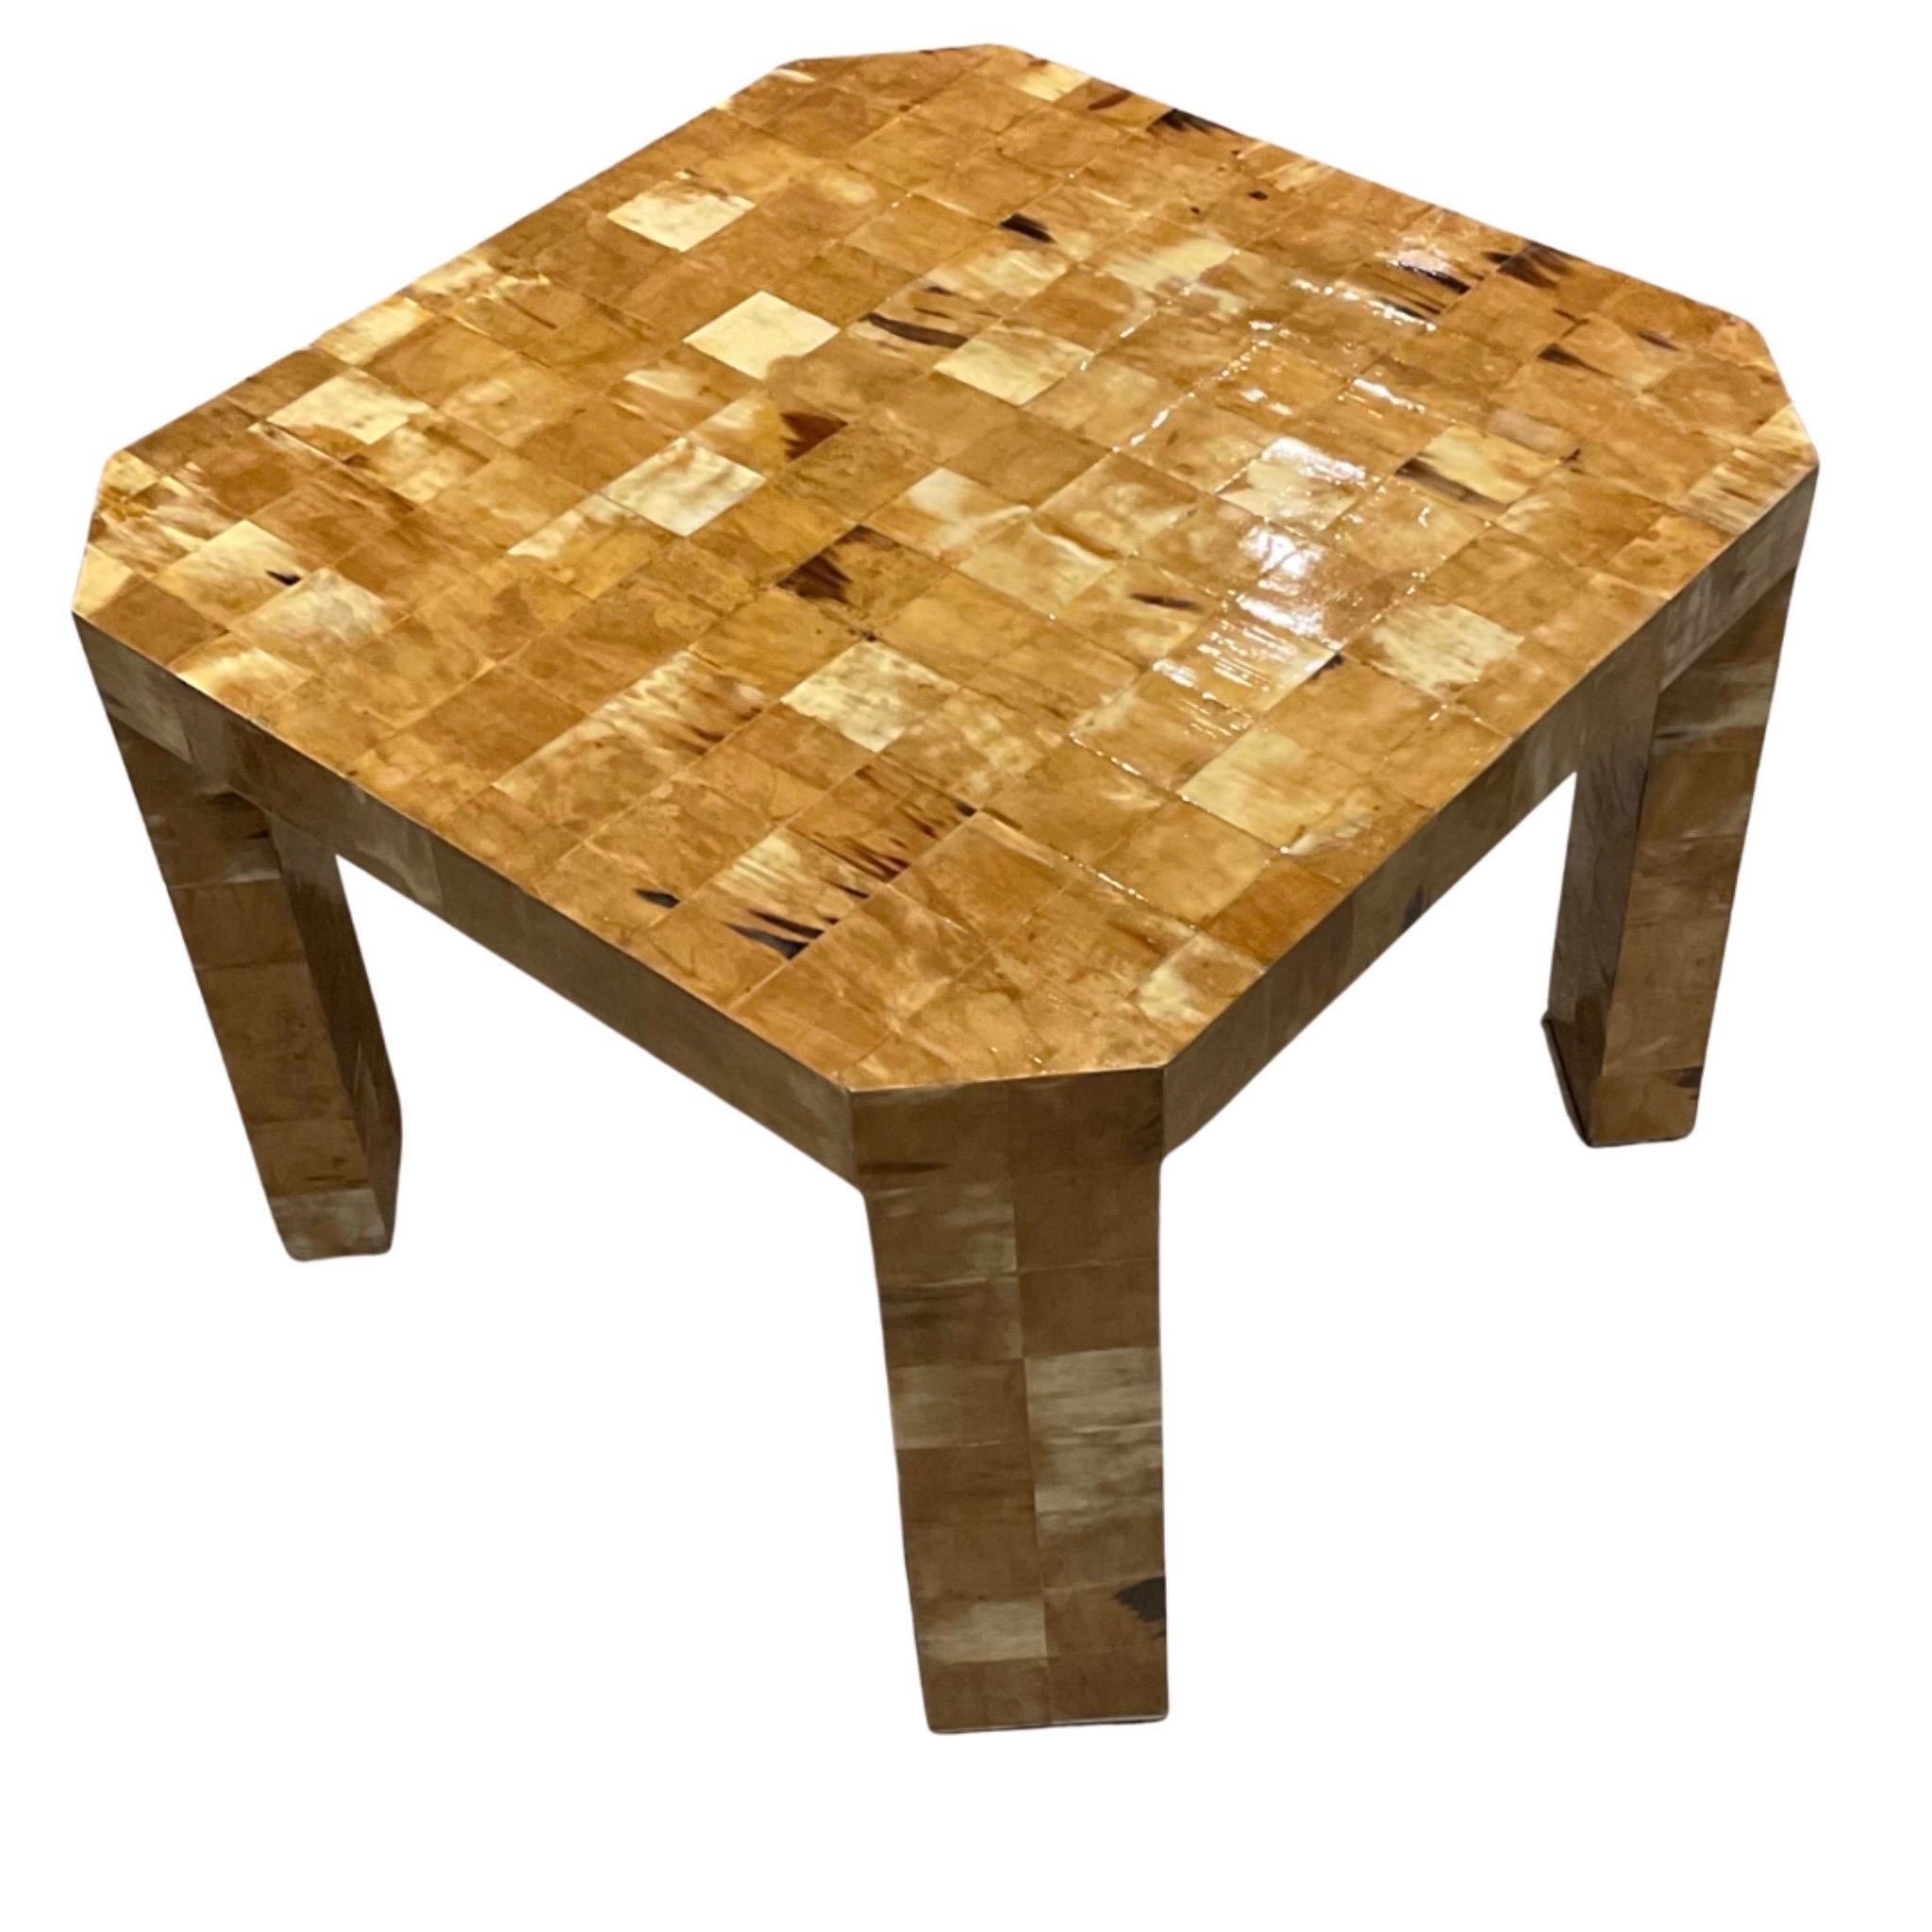 Octagonal Tessellated Horn Side Table
Beautiful Tan, Sand, & Light Brown Tones
This Table was created in Colombia for The Rudolph Collection
The Rudolph Collection was formed by Muriel Rudolph in the late 1960's
A Custom, Hand-Made Furniture &